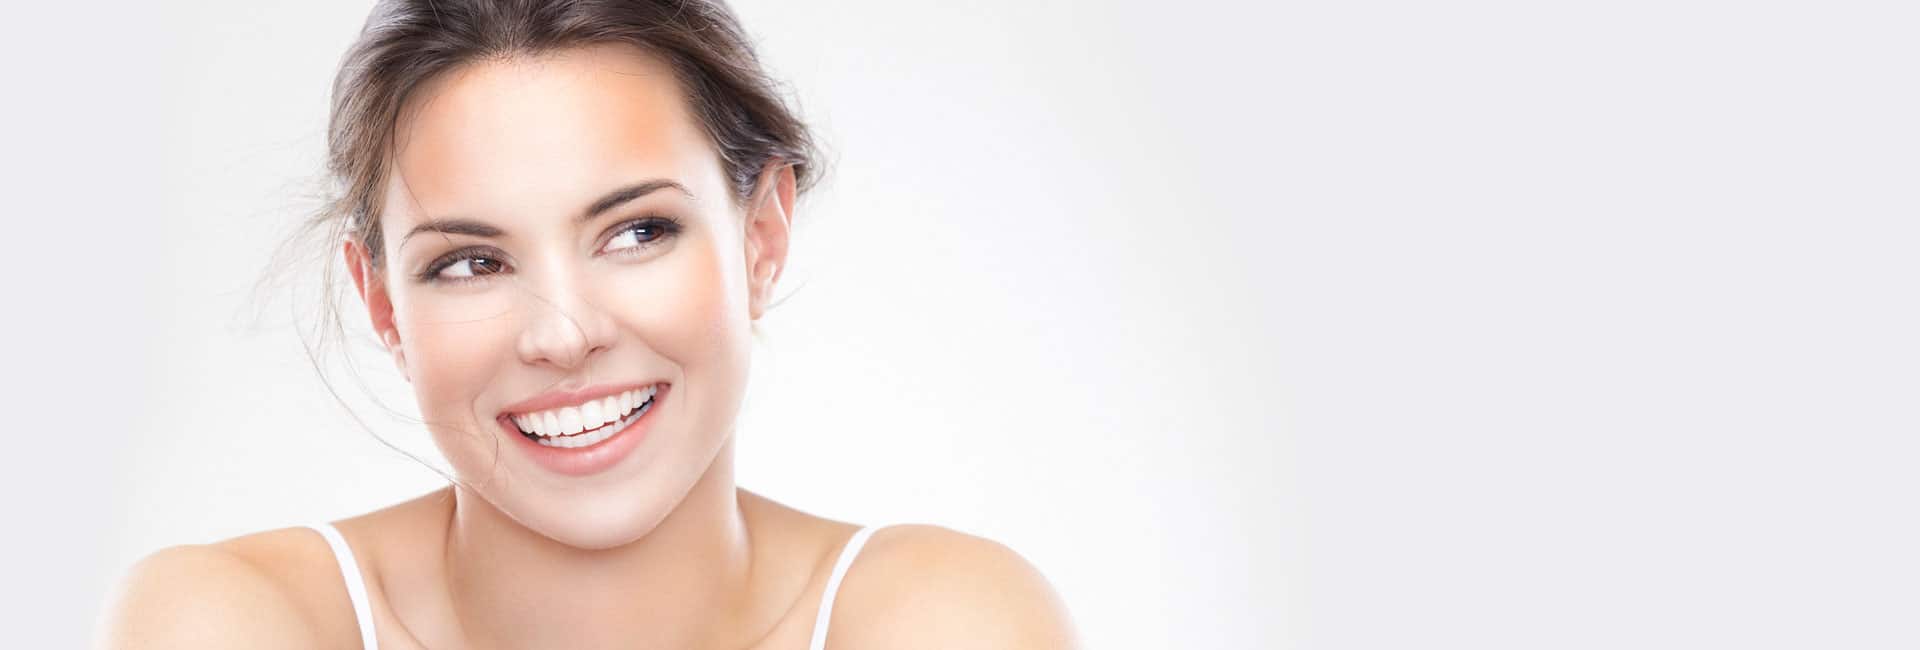 Botox Injectables - Wrinkles, Fine ...